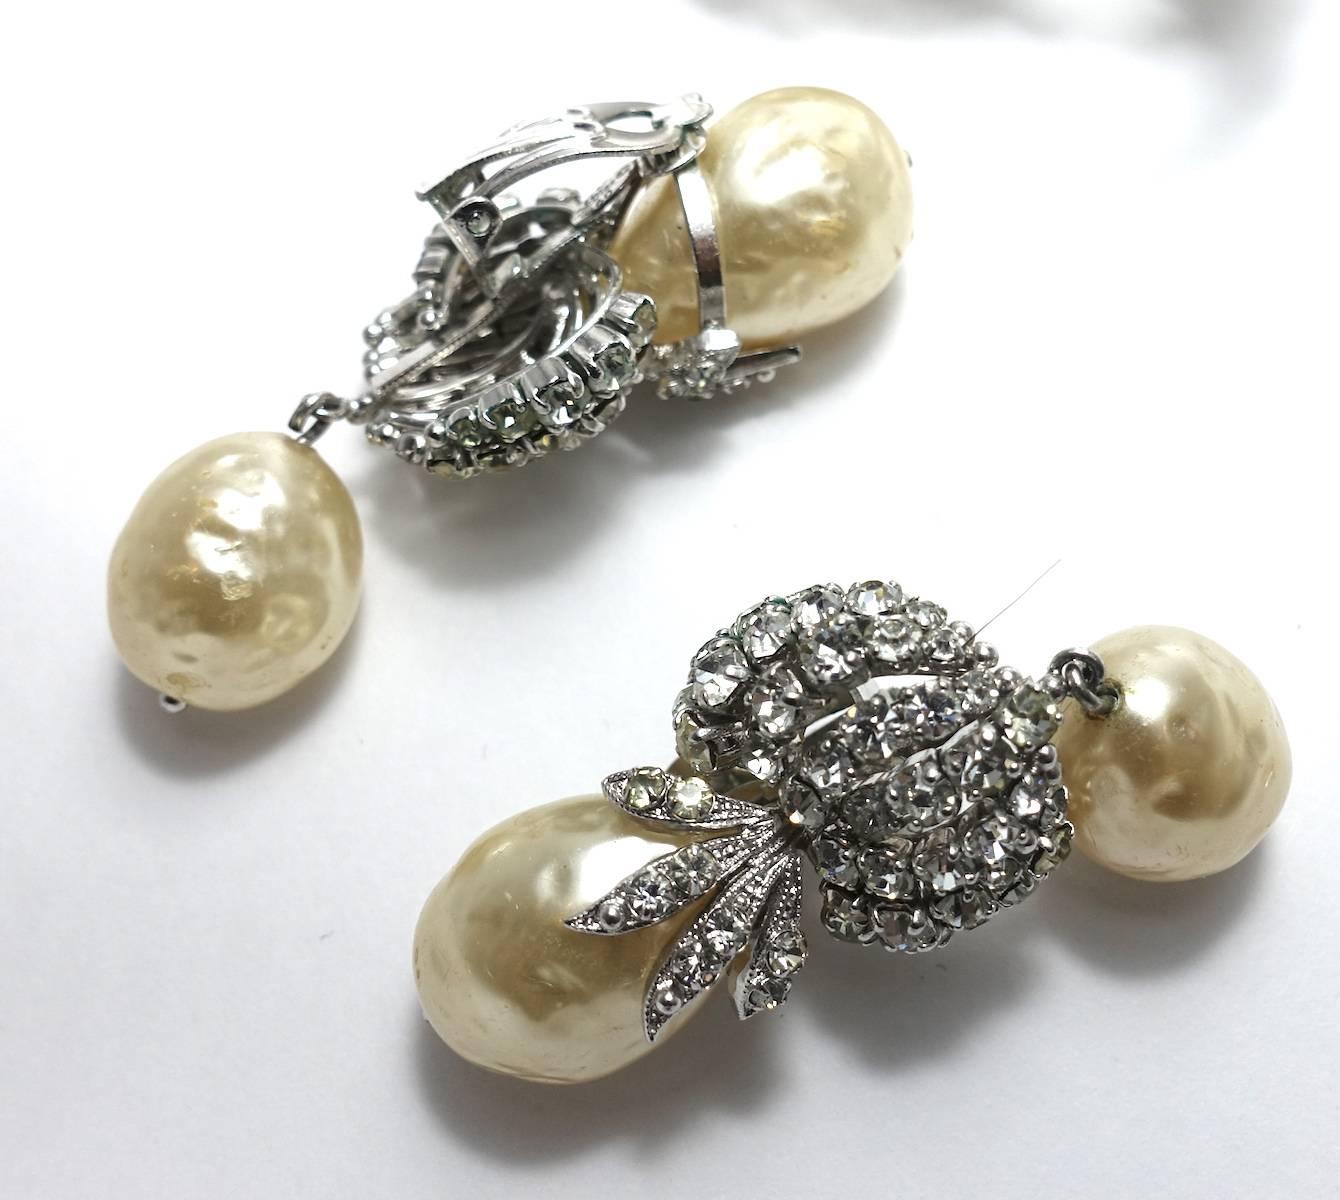 Women's RARE COUTURE Christian Dior Large Vintage Dated 1960 Faux Pearl & Crystal Brooch